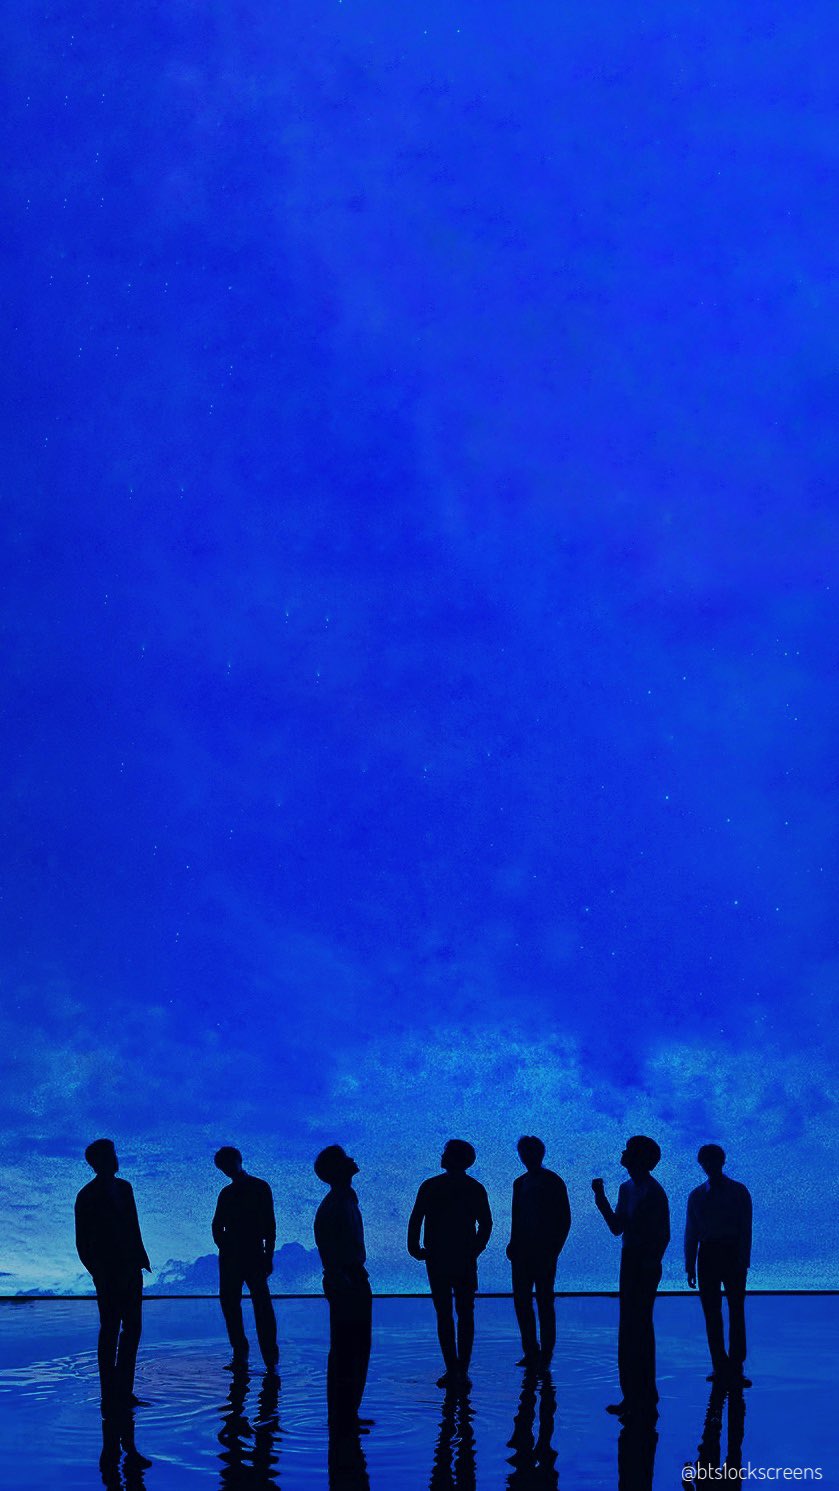 Bts Silhouette Wallpapers